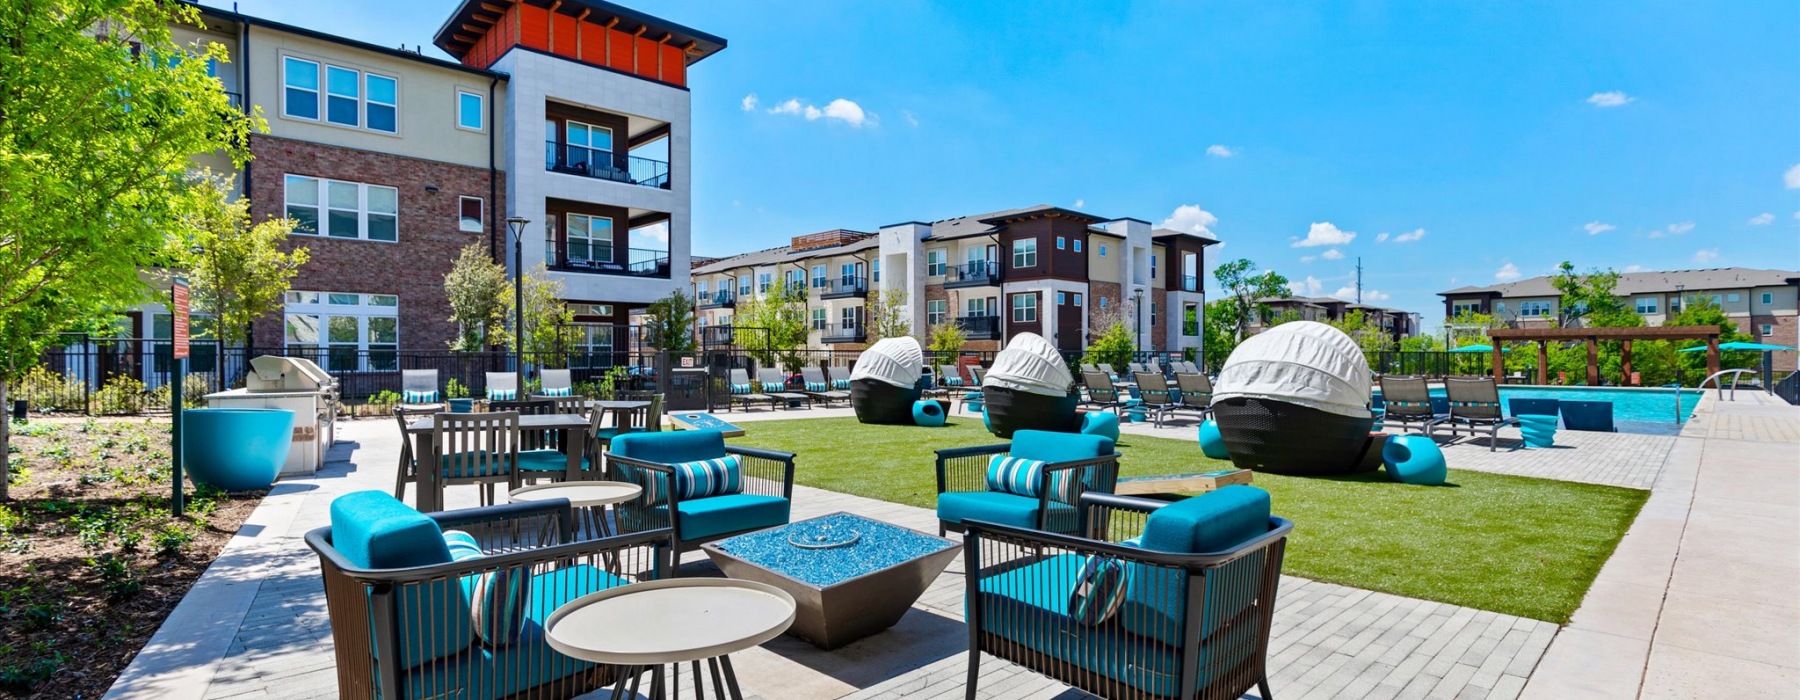 Outdoor lounge spaces with cabanas and a view of the pool at McKinney Terrace apartments in downtown McKinney, TX